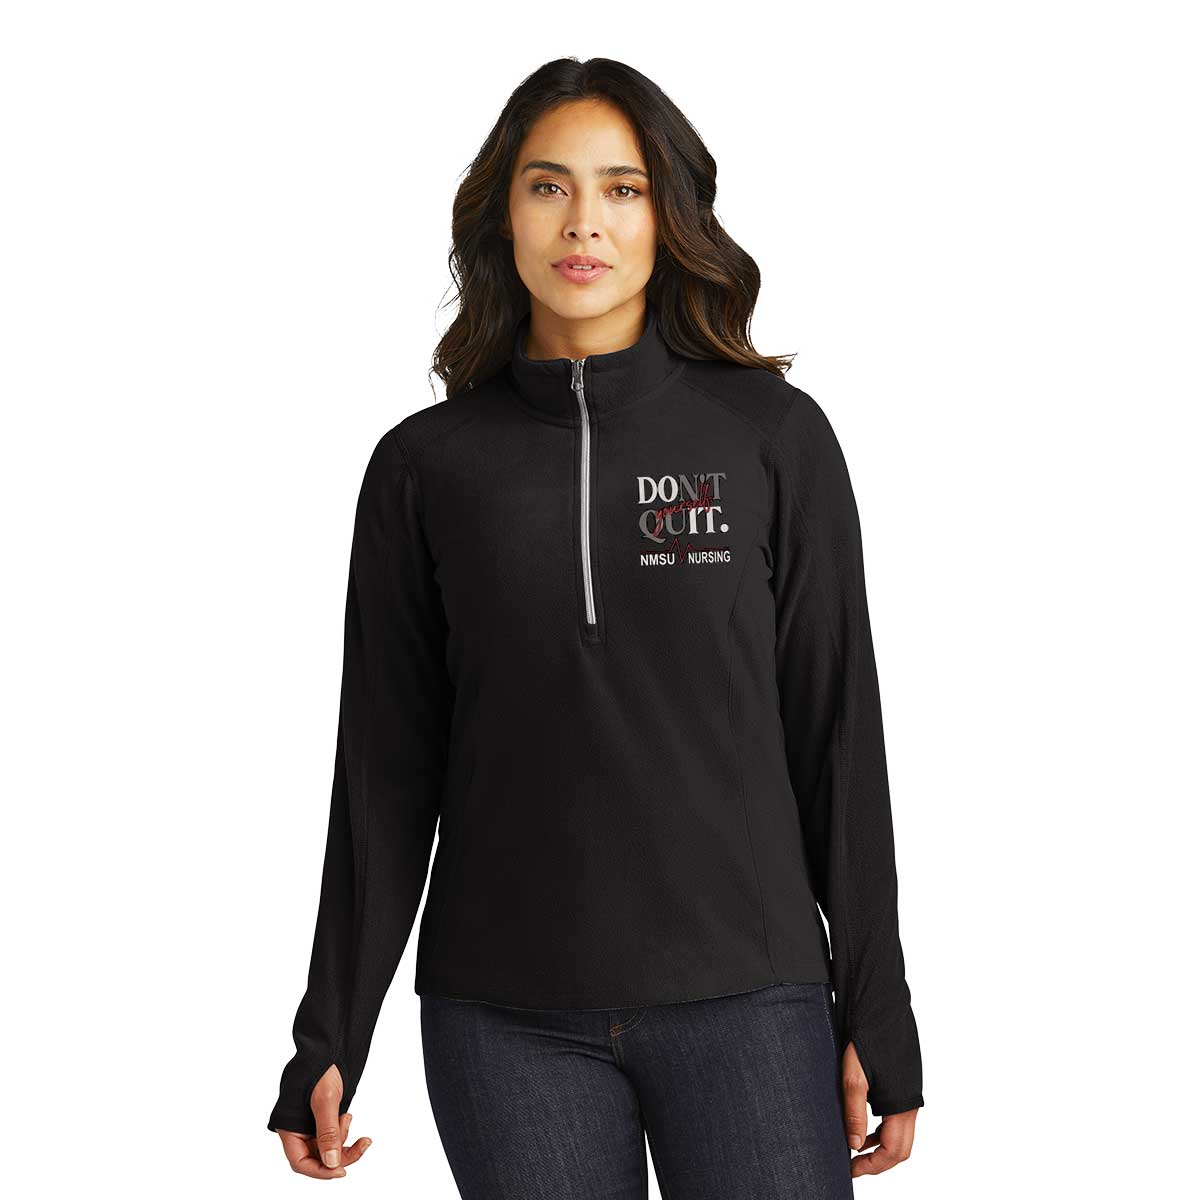 Ladies NMSU SNA Student Nurses Association Microfleece 1/2-Zip Pullover with Thumbhole Cuffs and Embroidered Logo